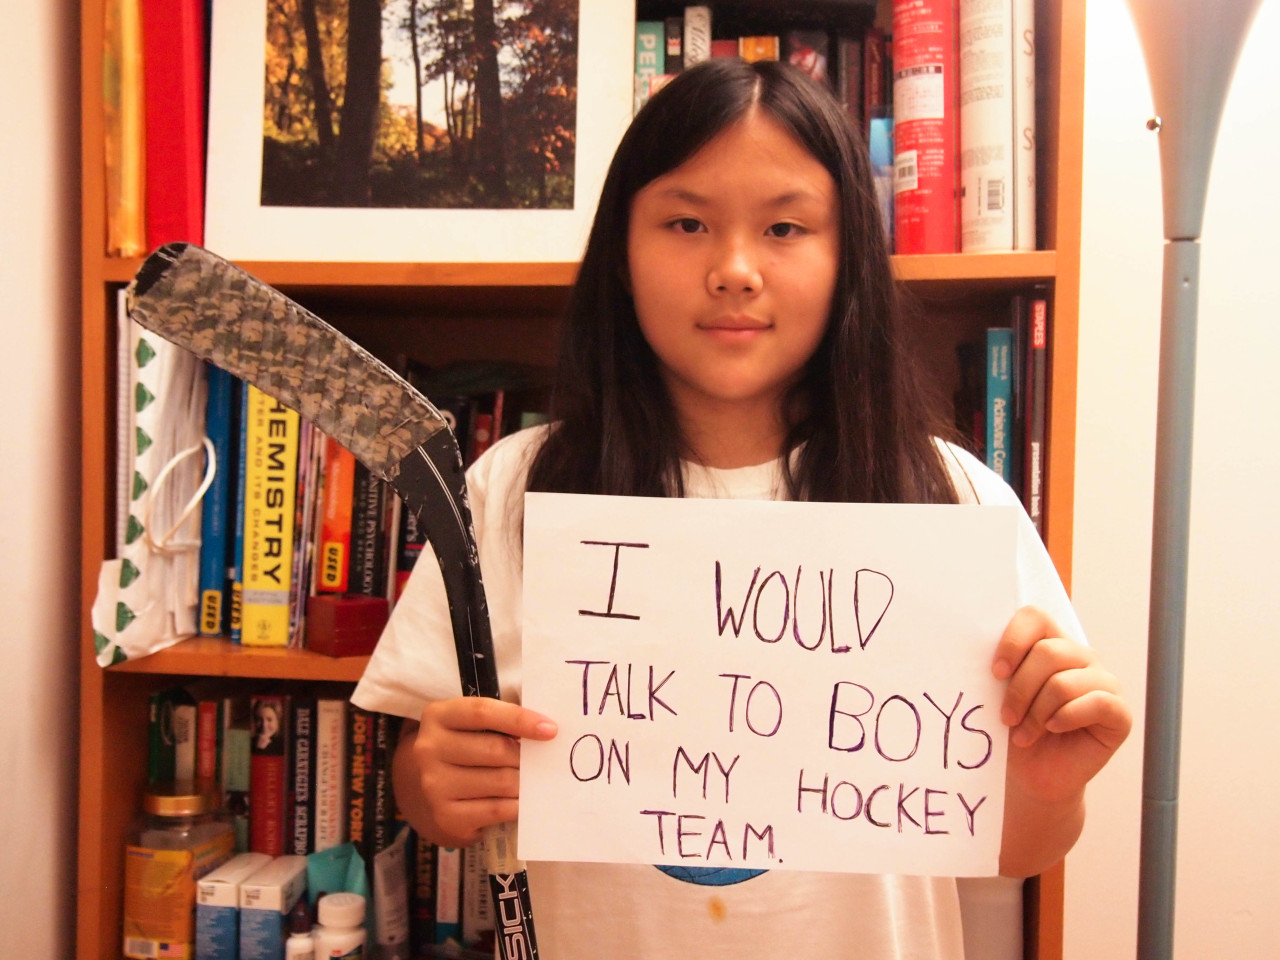 If I weren’t afraid, I would talk to the boys on my hockey team. I am the only girl on my team of fourteen, and even though I play as hard as the boys do and score, I don’t always feel like I am a part of the team. It takes the work of both sides! I...